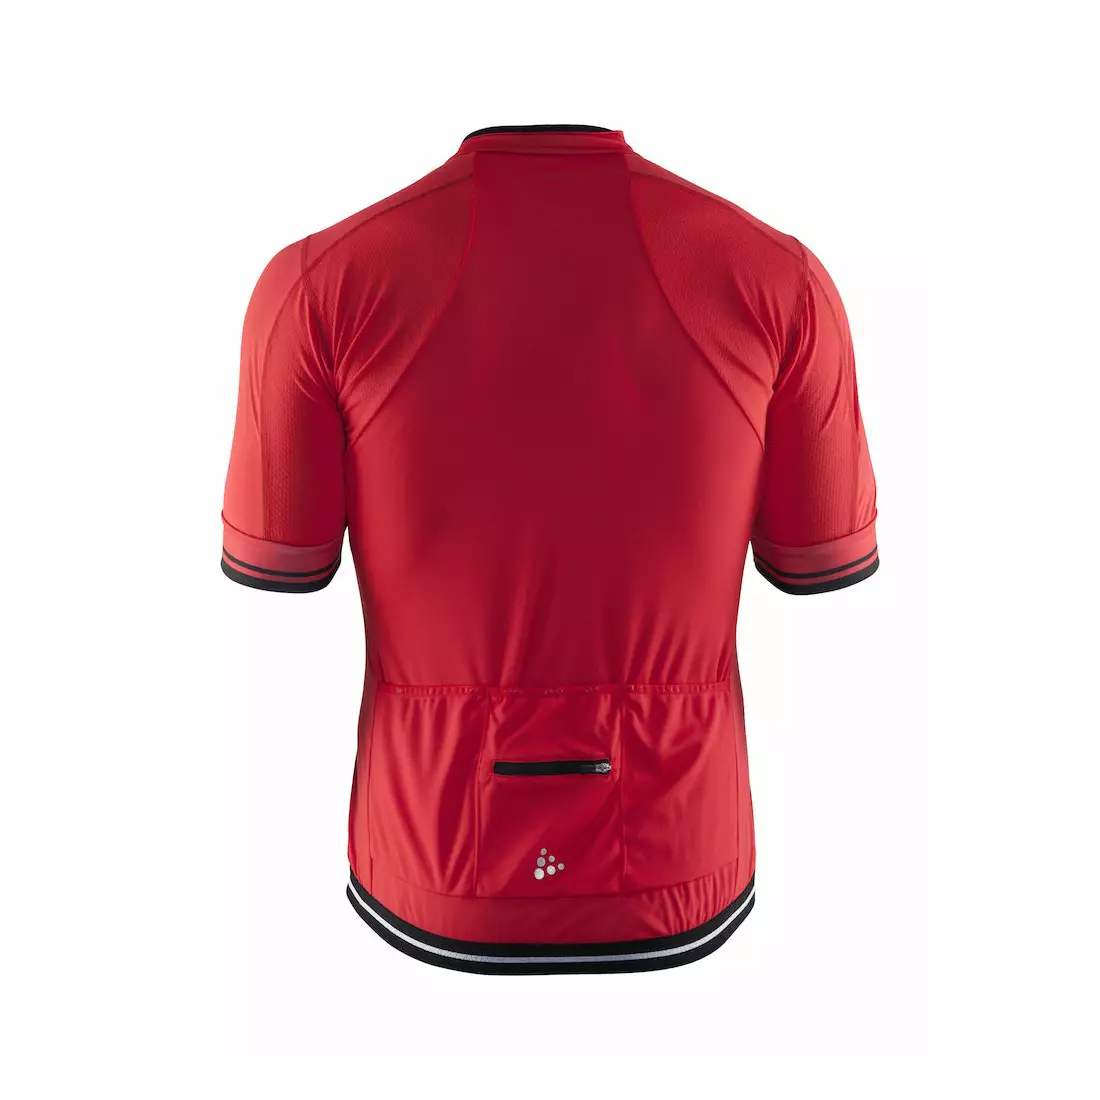 CRAFT PUNCHEUR men's cycling jersey 1903294-2430